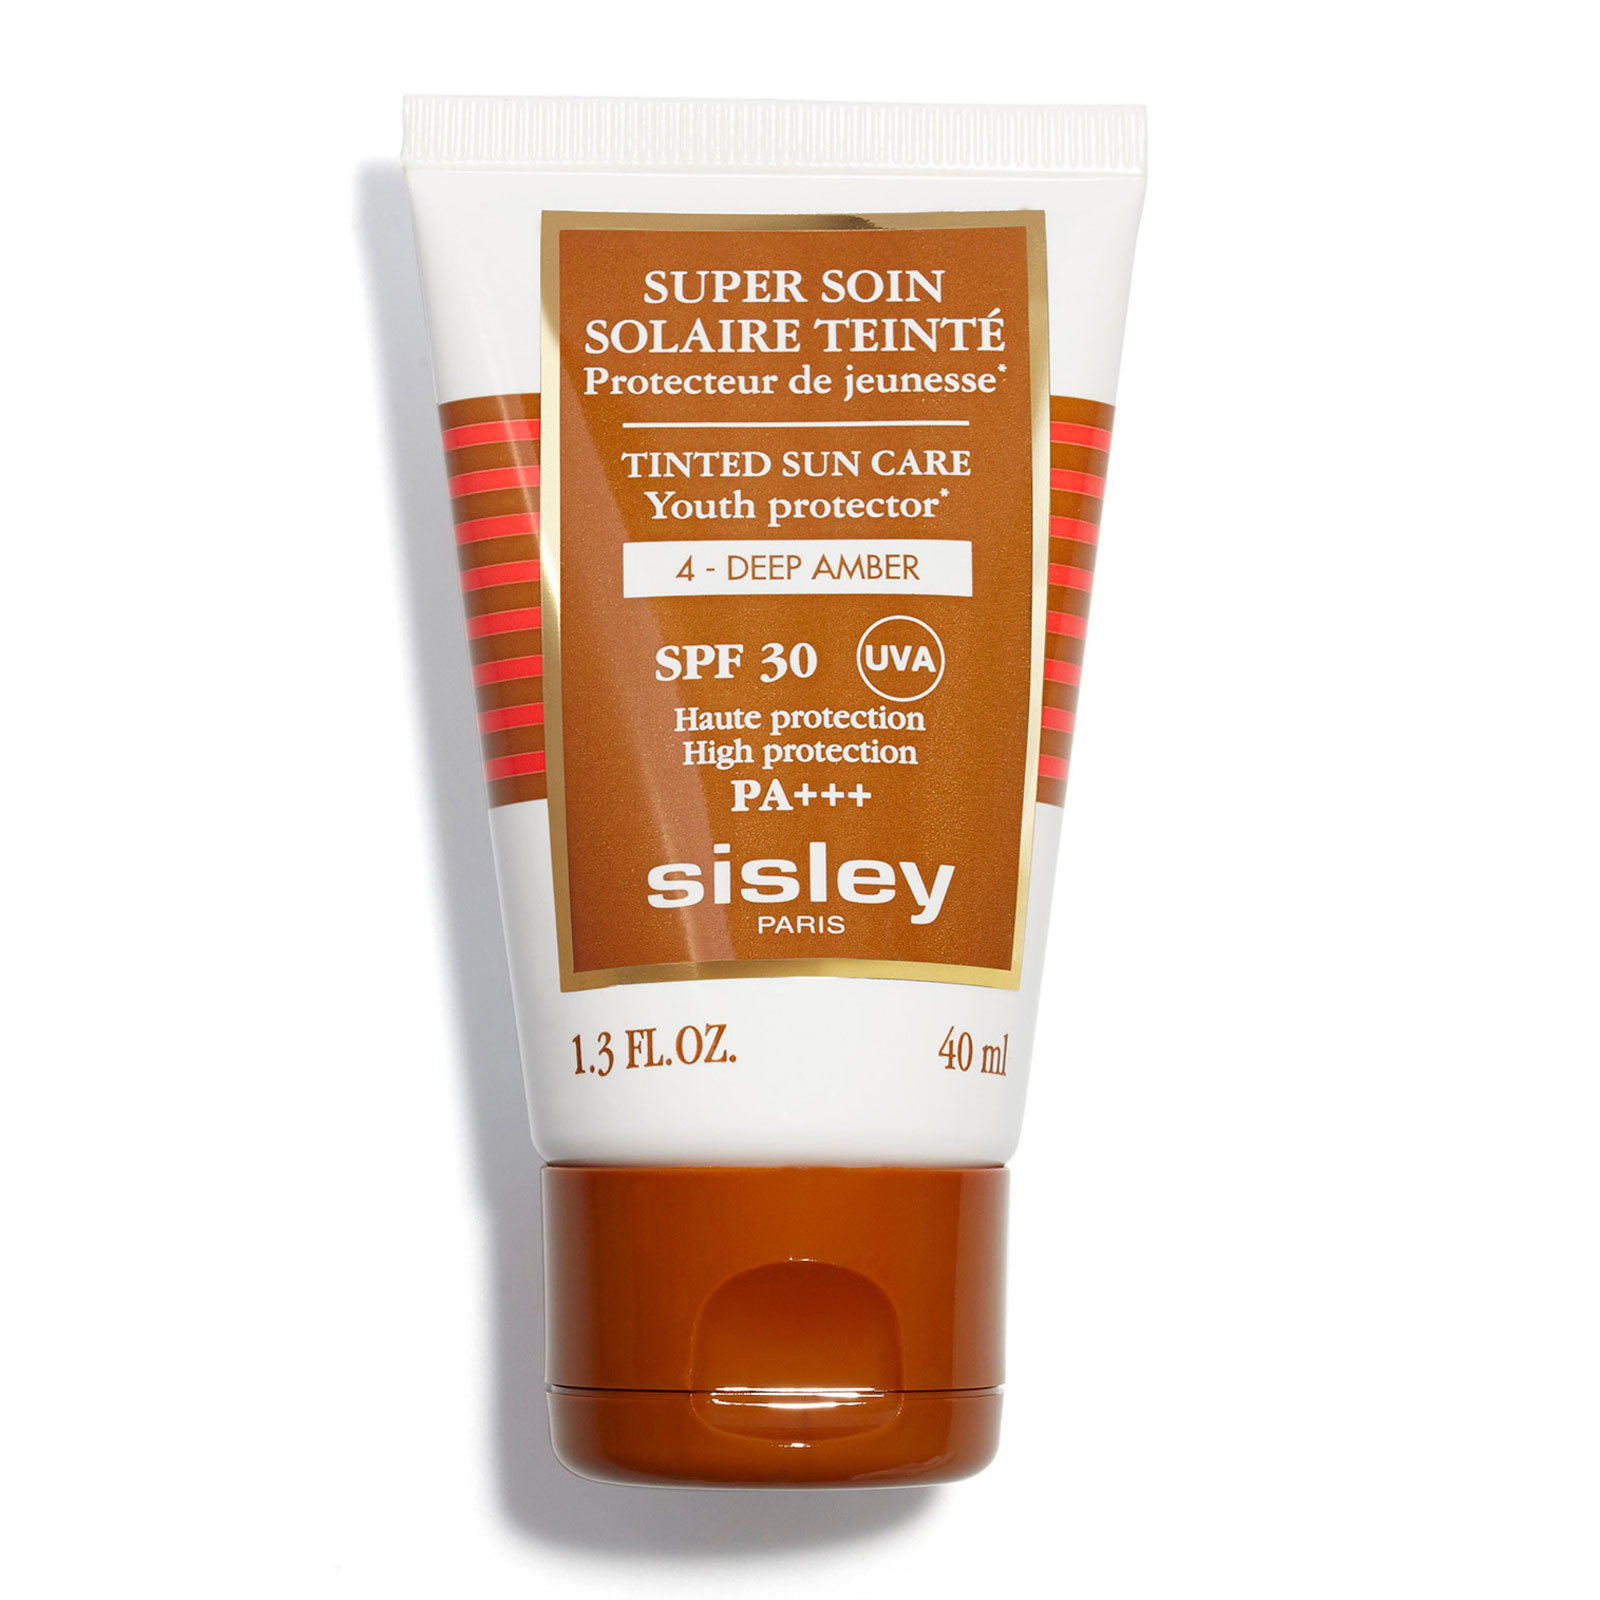 Sisley Super Soin Solaire Tinted Sun Care Spf30 40Ml 4 Deep Amber